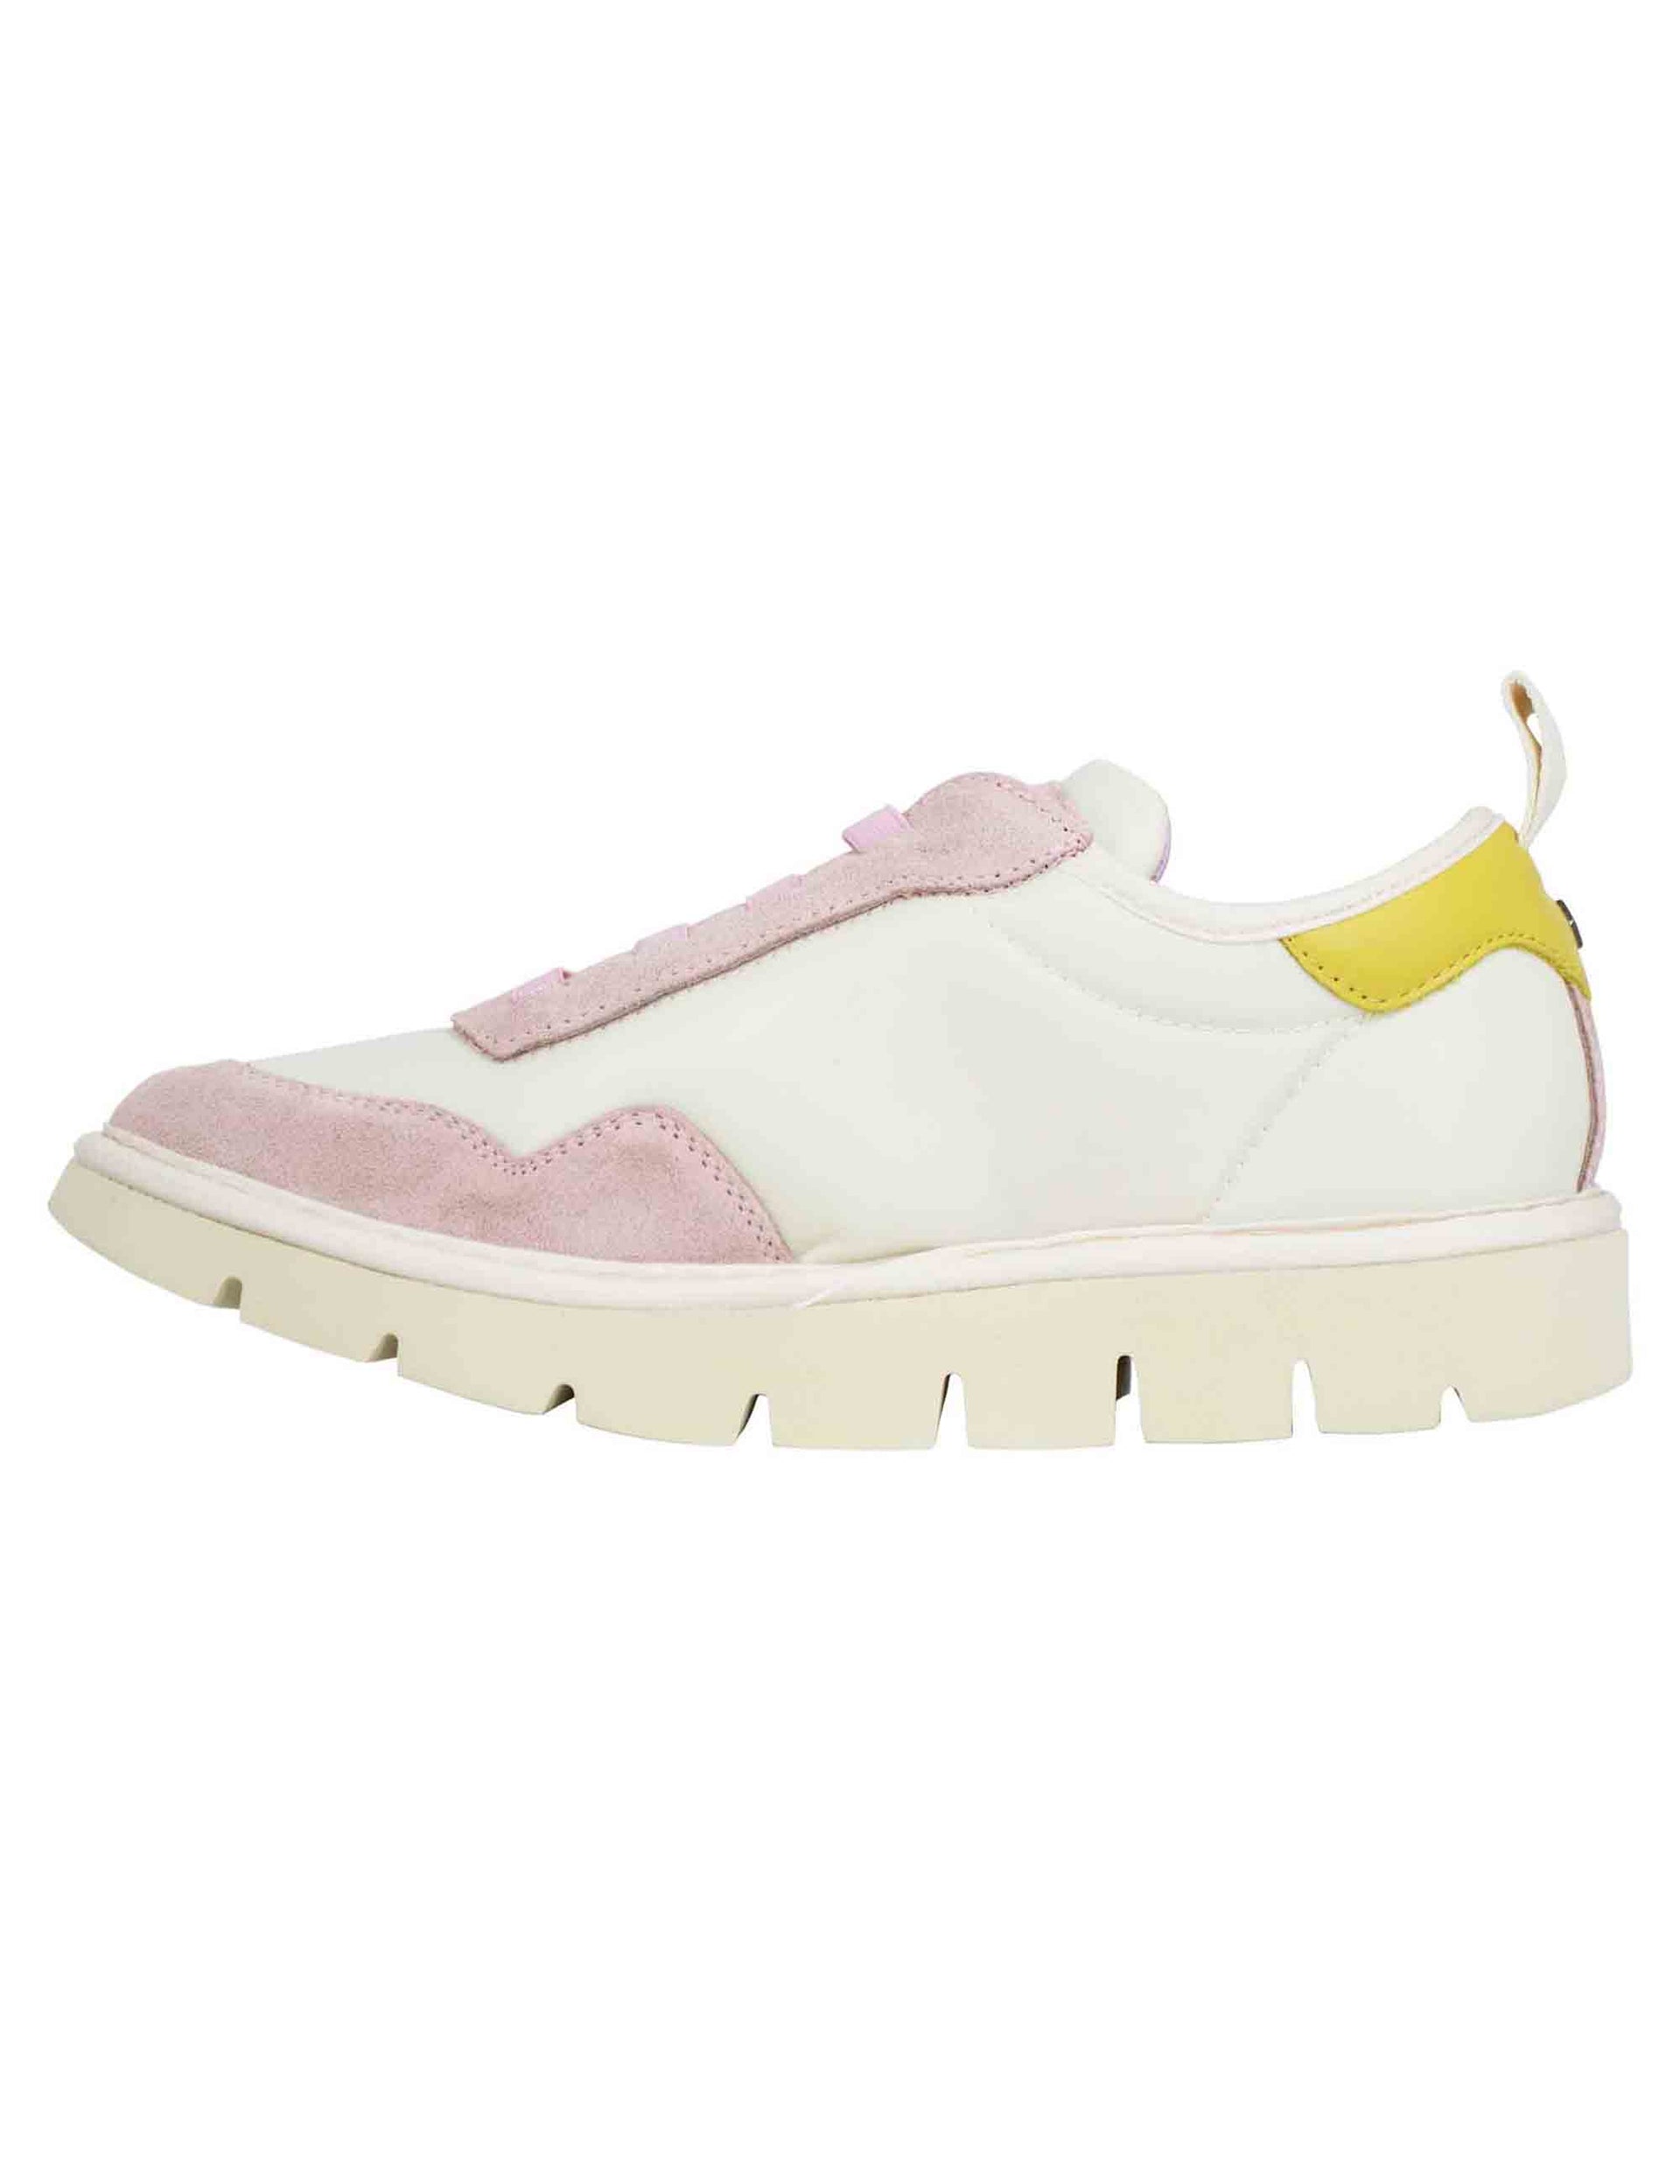 Women's sneakers in off-white fabric